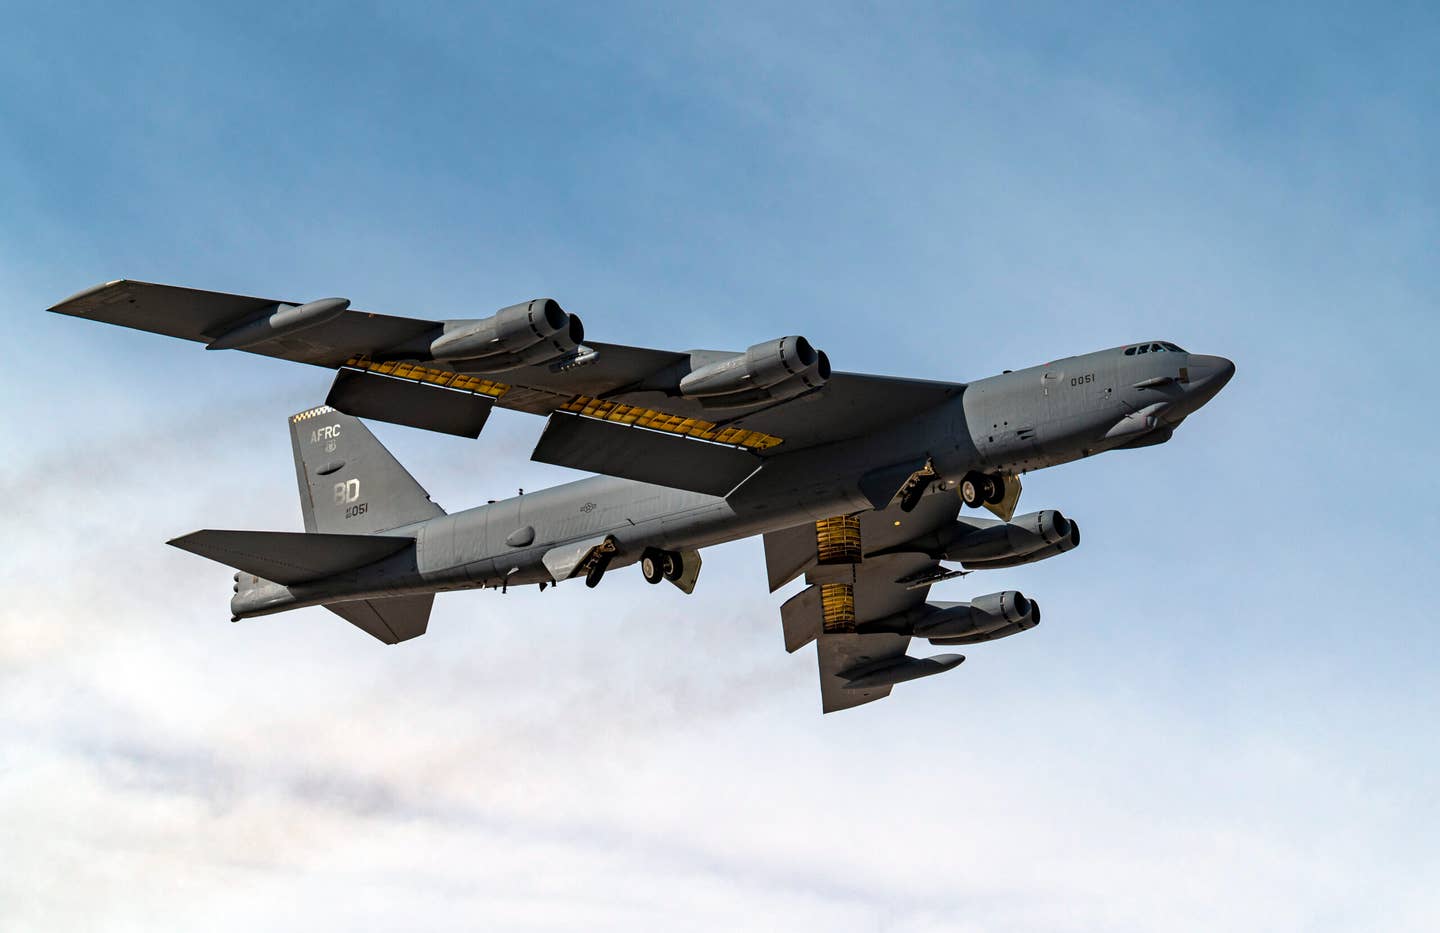 A B-52 Stratofortress assigned to the 340th Weapons Squadron at Barksdale Air Force Base, La., takes off during a U.S. Air Force Weapons School Integration exercise at Nellis AFB, Nev., Nov. 18, 2021.&nbsp;<em>Credit: U.S. Air Force photo by William R. Lewis</em>